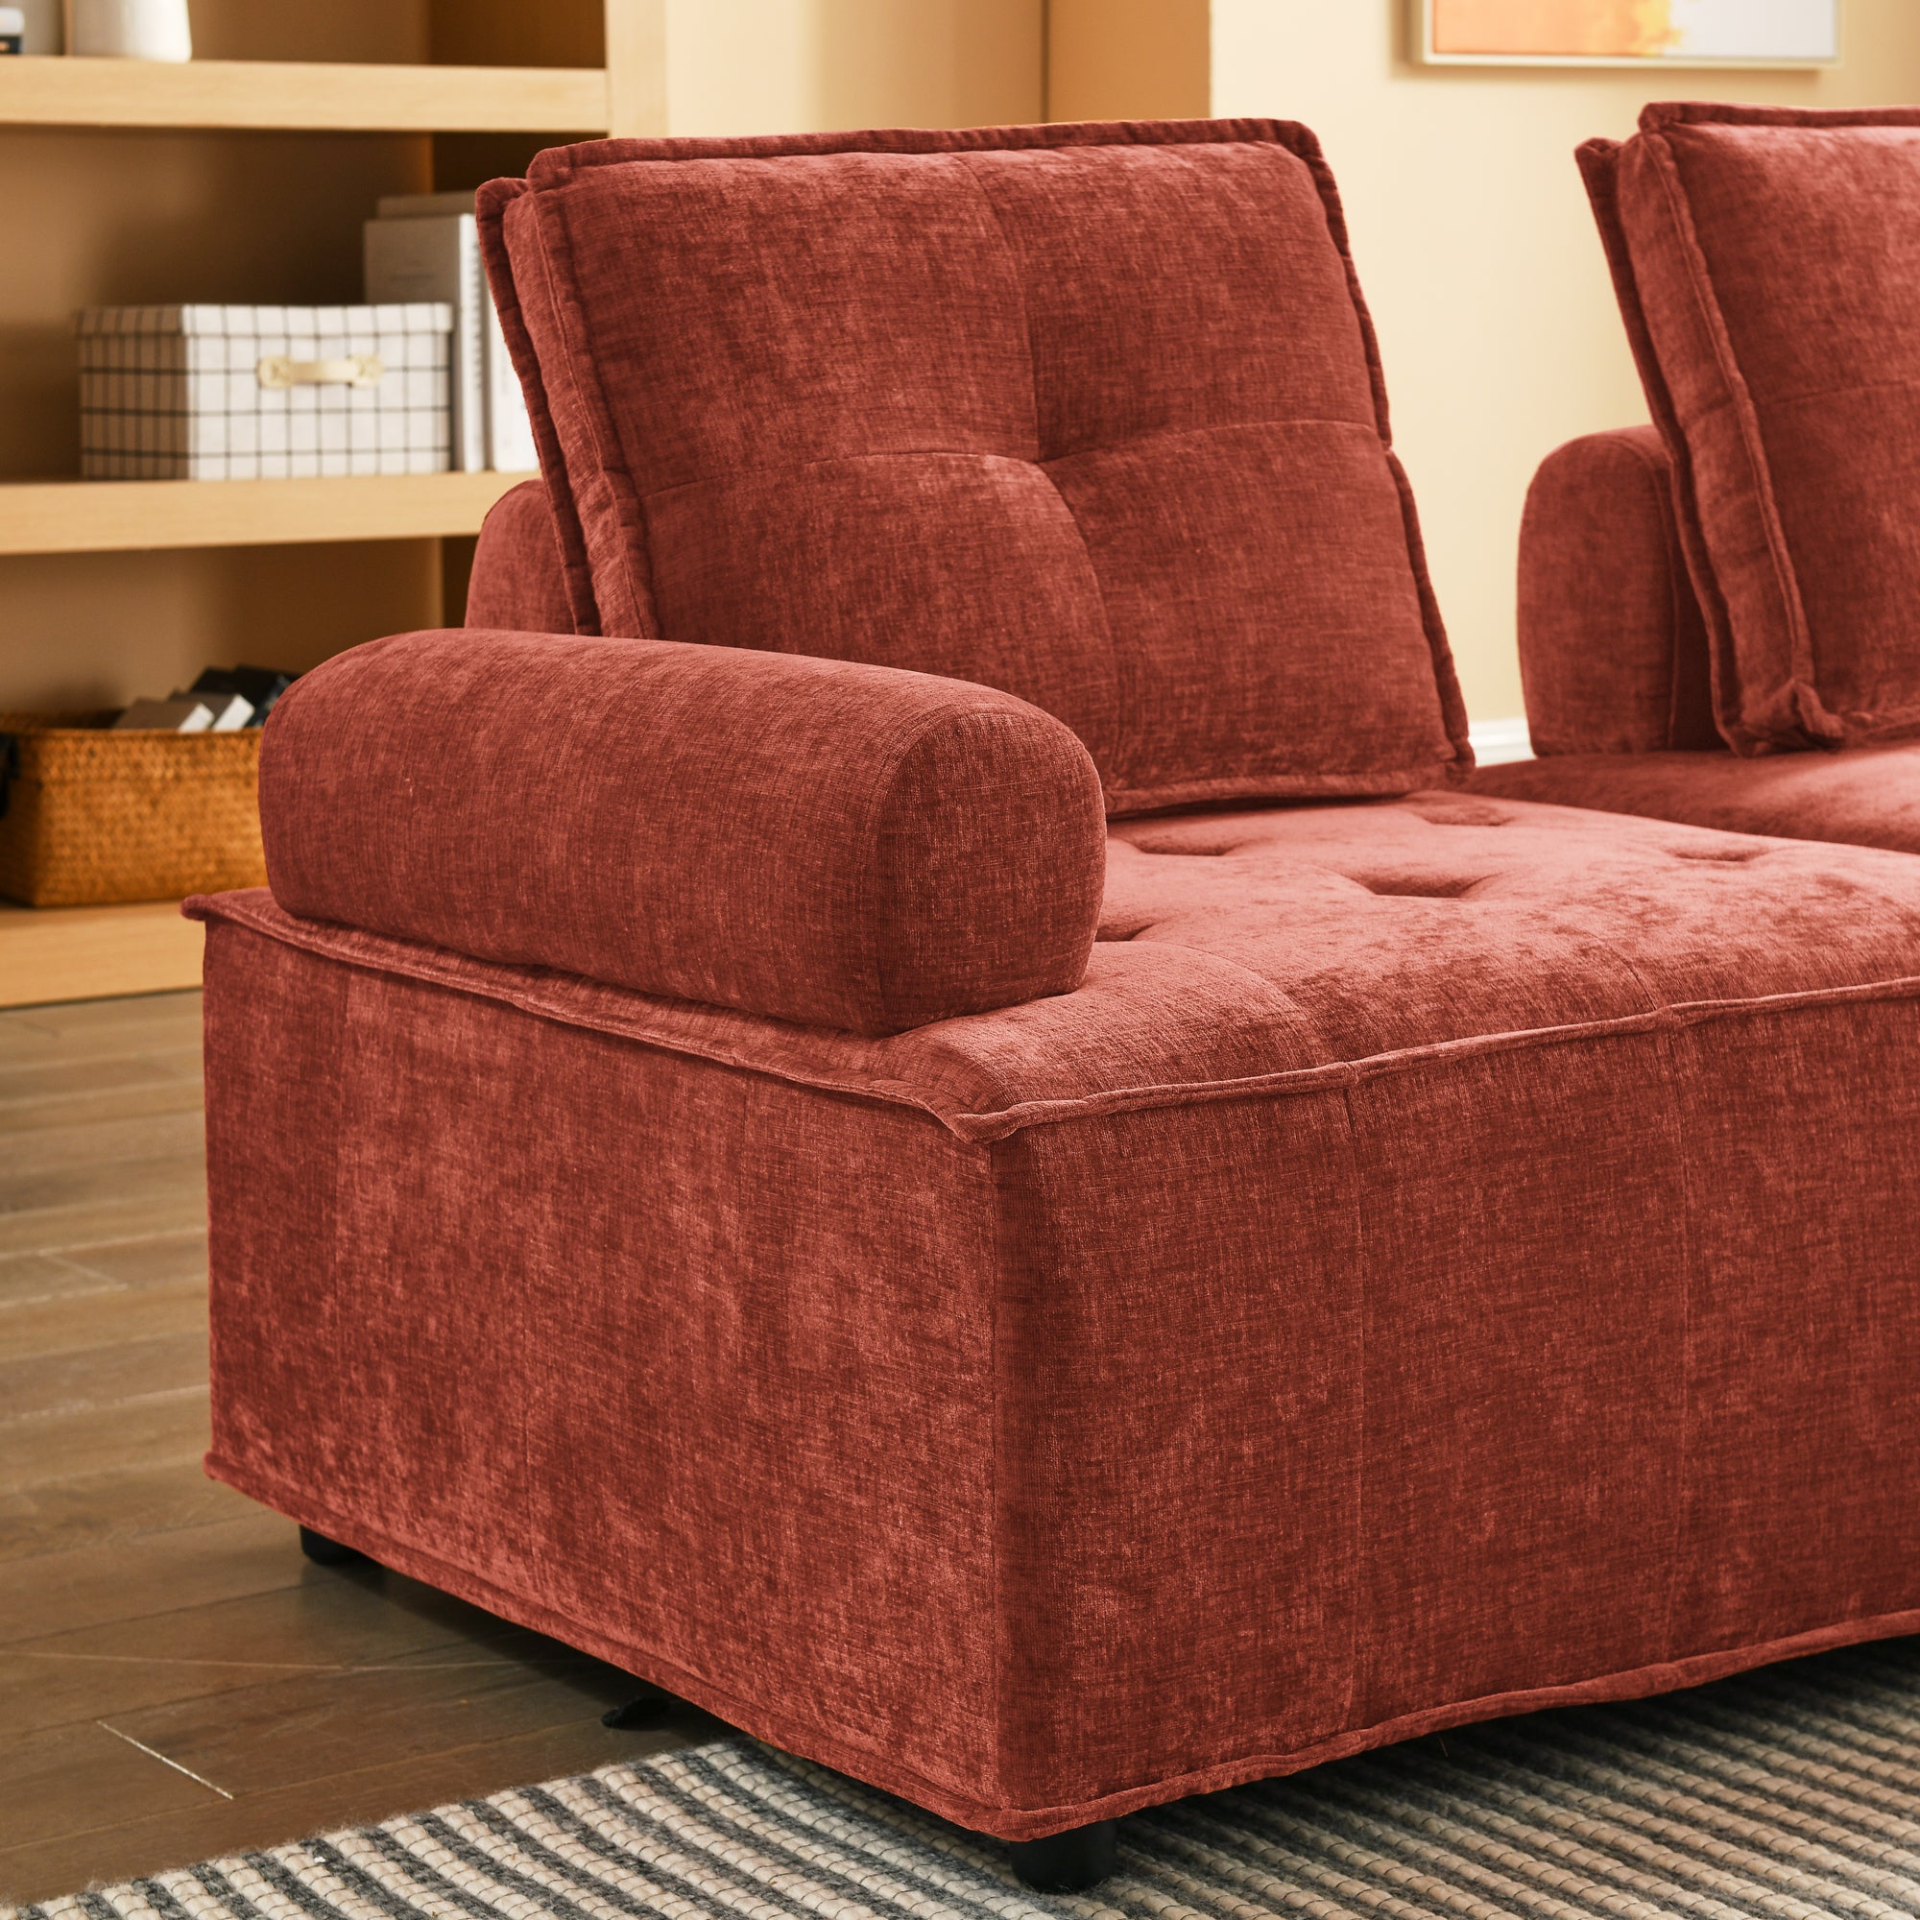 Red-Orange Remix L-Shape Modular Sectional Sofa in Chenille